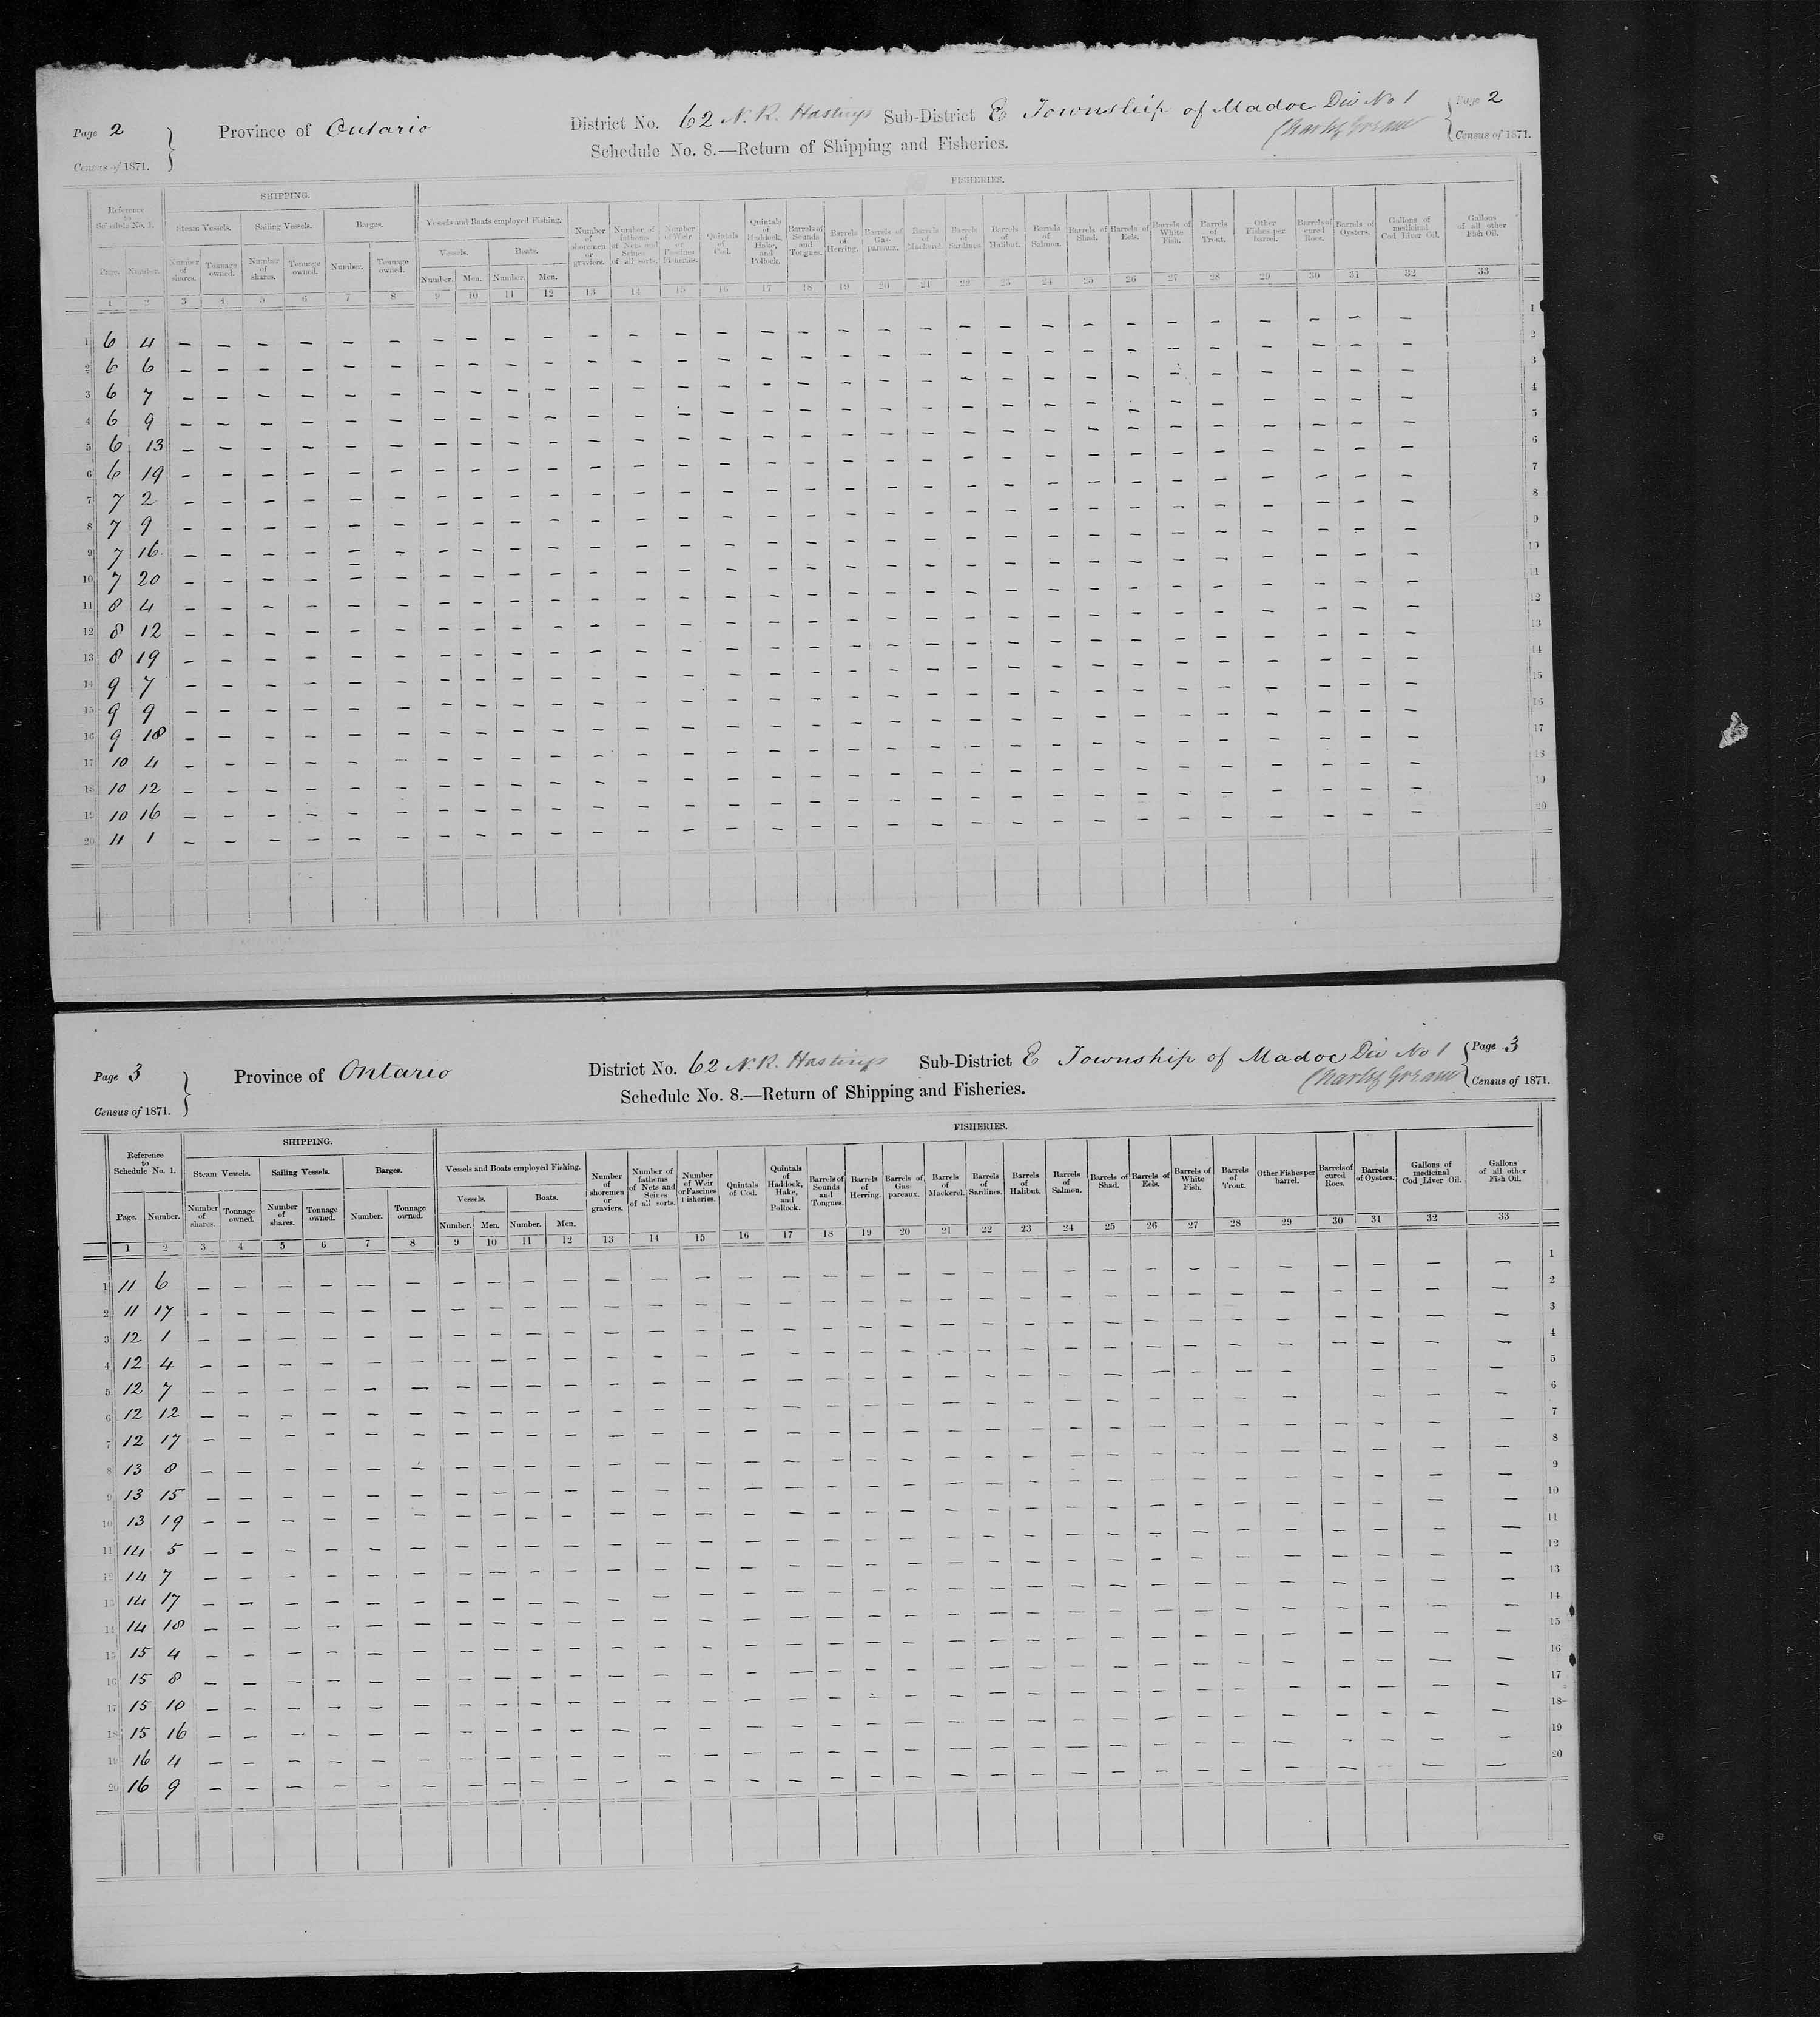 Title: Census of Canada, 1871 - Mikan Number: 142105 - Microform: c-9994